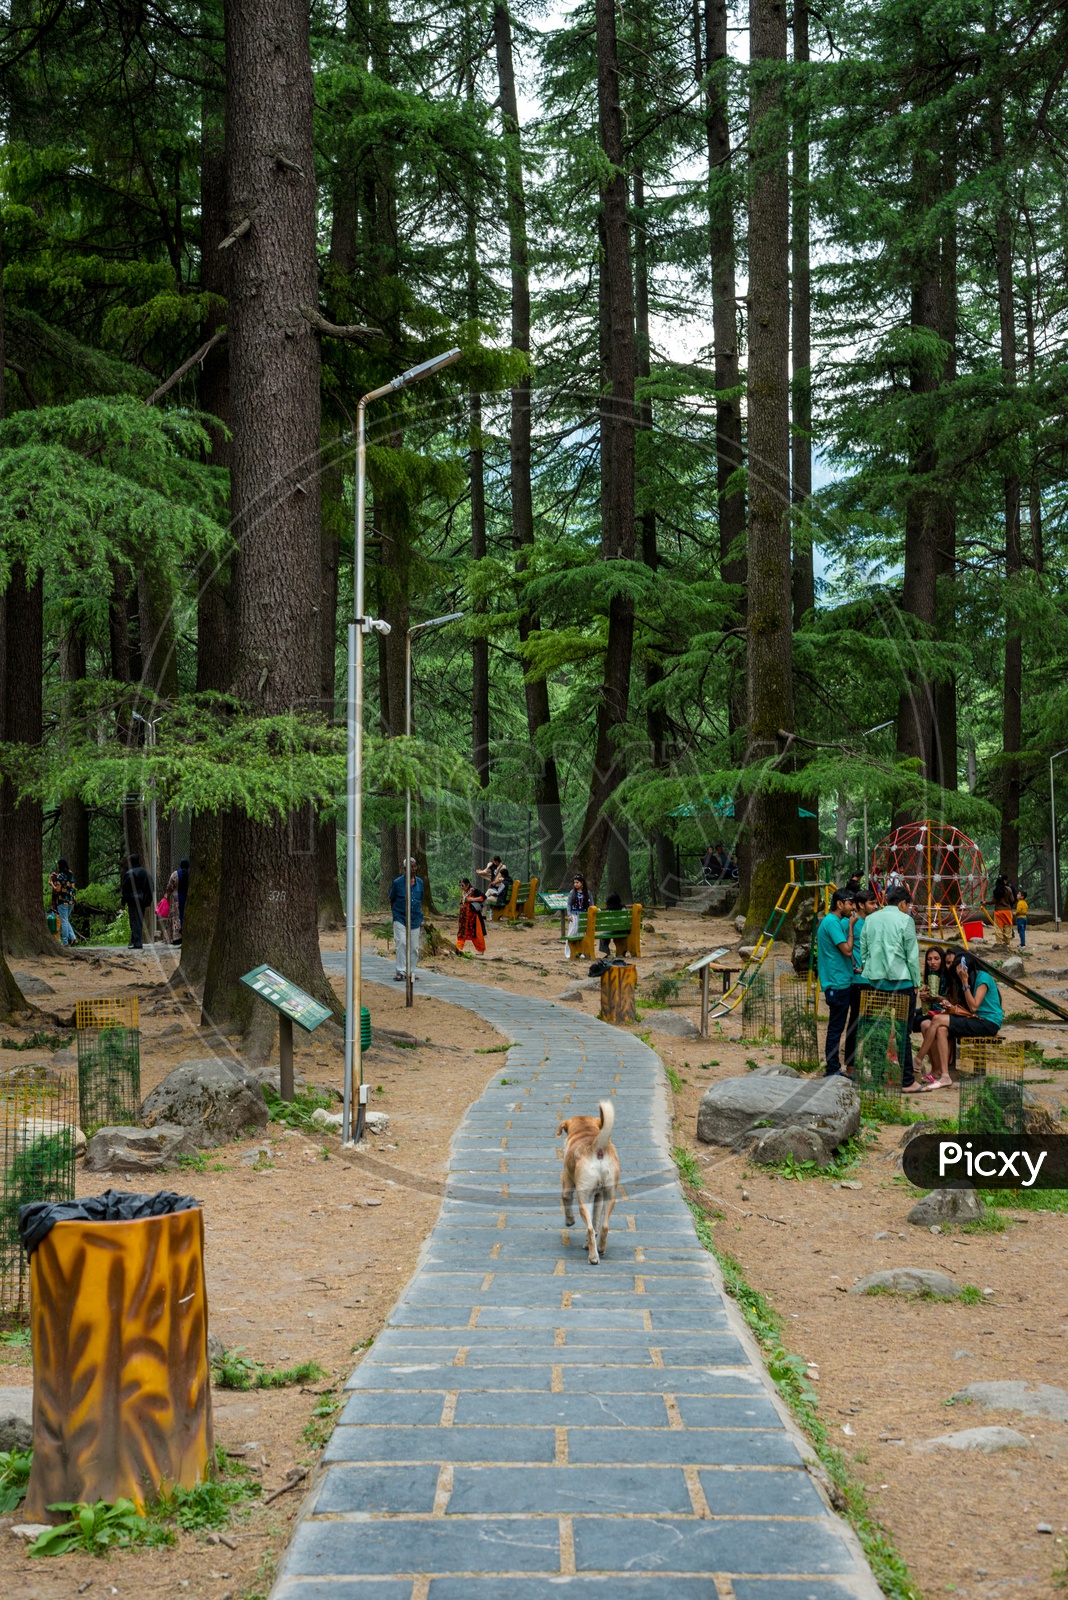 A Dog walking on Pathway with Tourists in Background at Van Vihar National Park